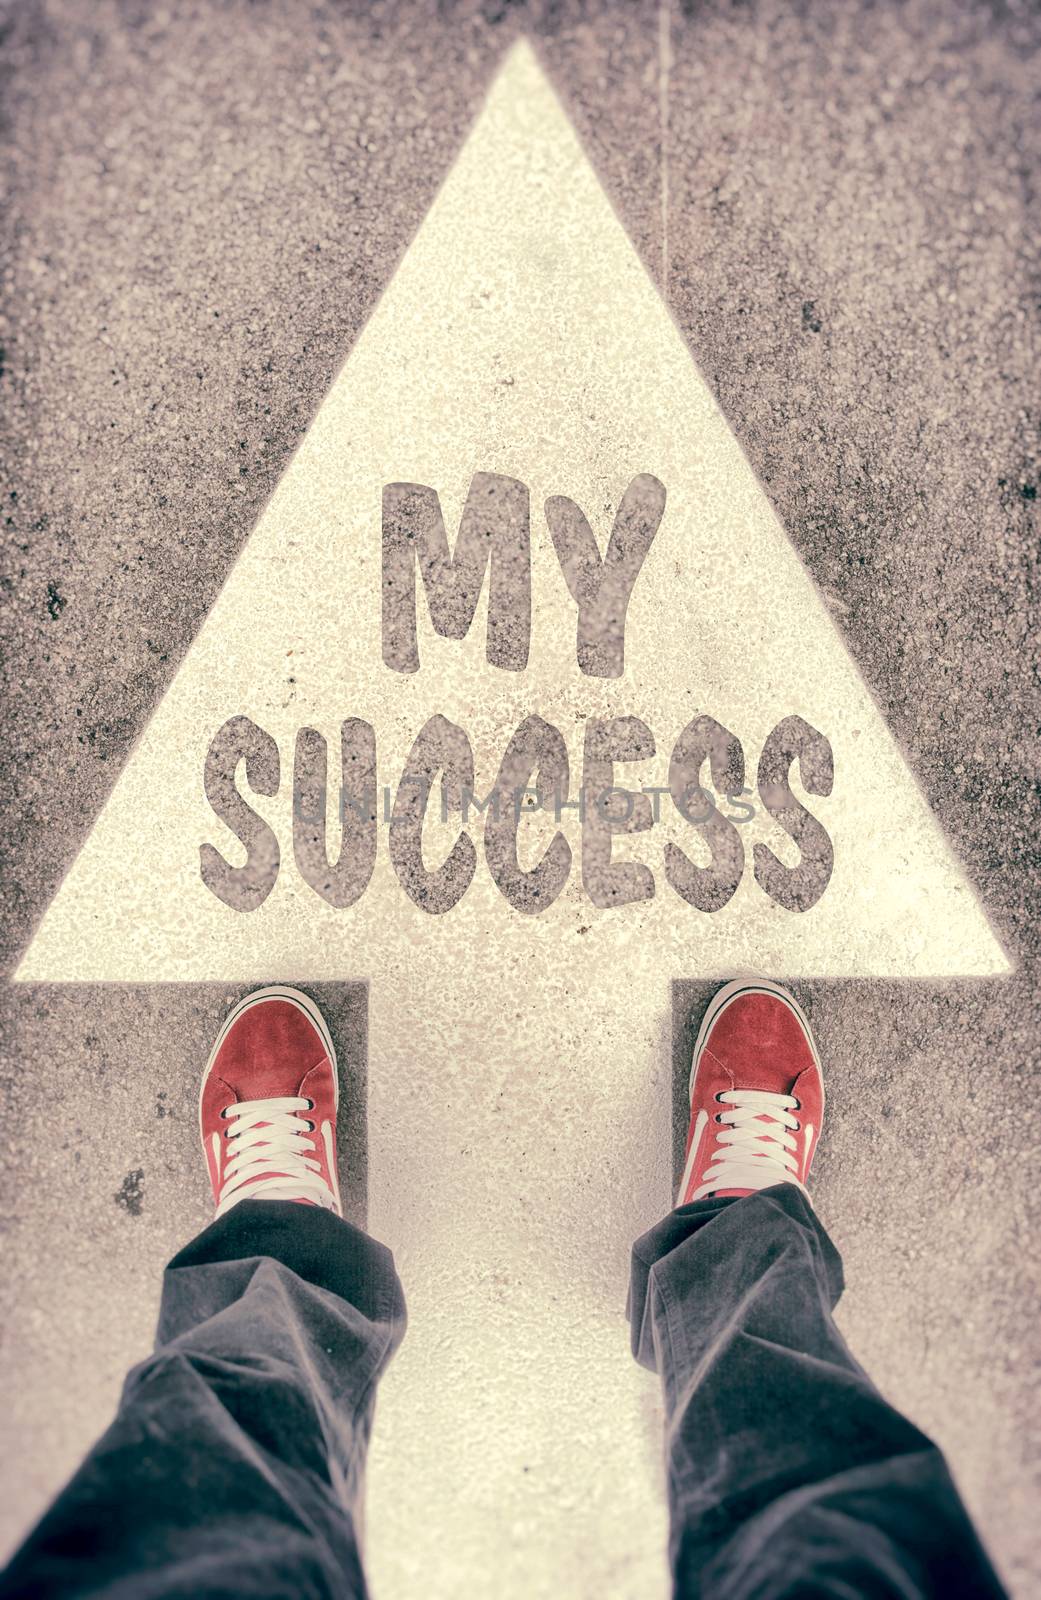 My success concept by badmanproduction